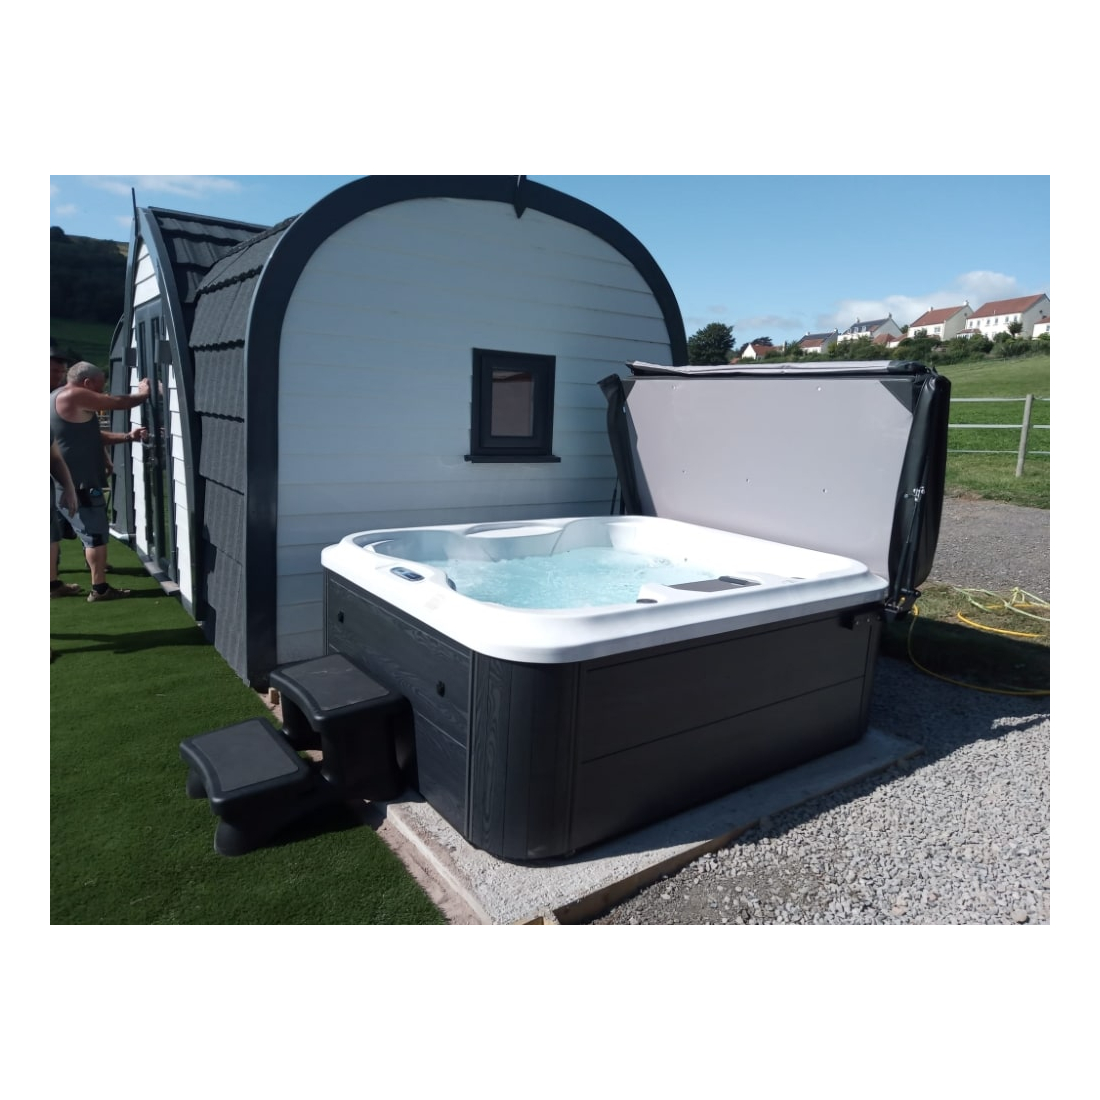 Is Your Holiday Home’s Hot Tub Compliant With HSG282?